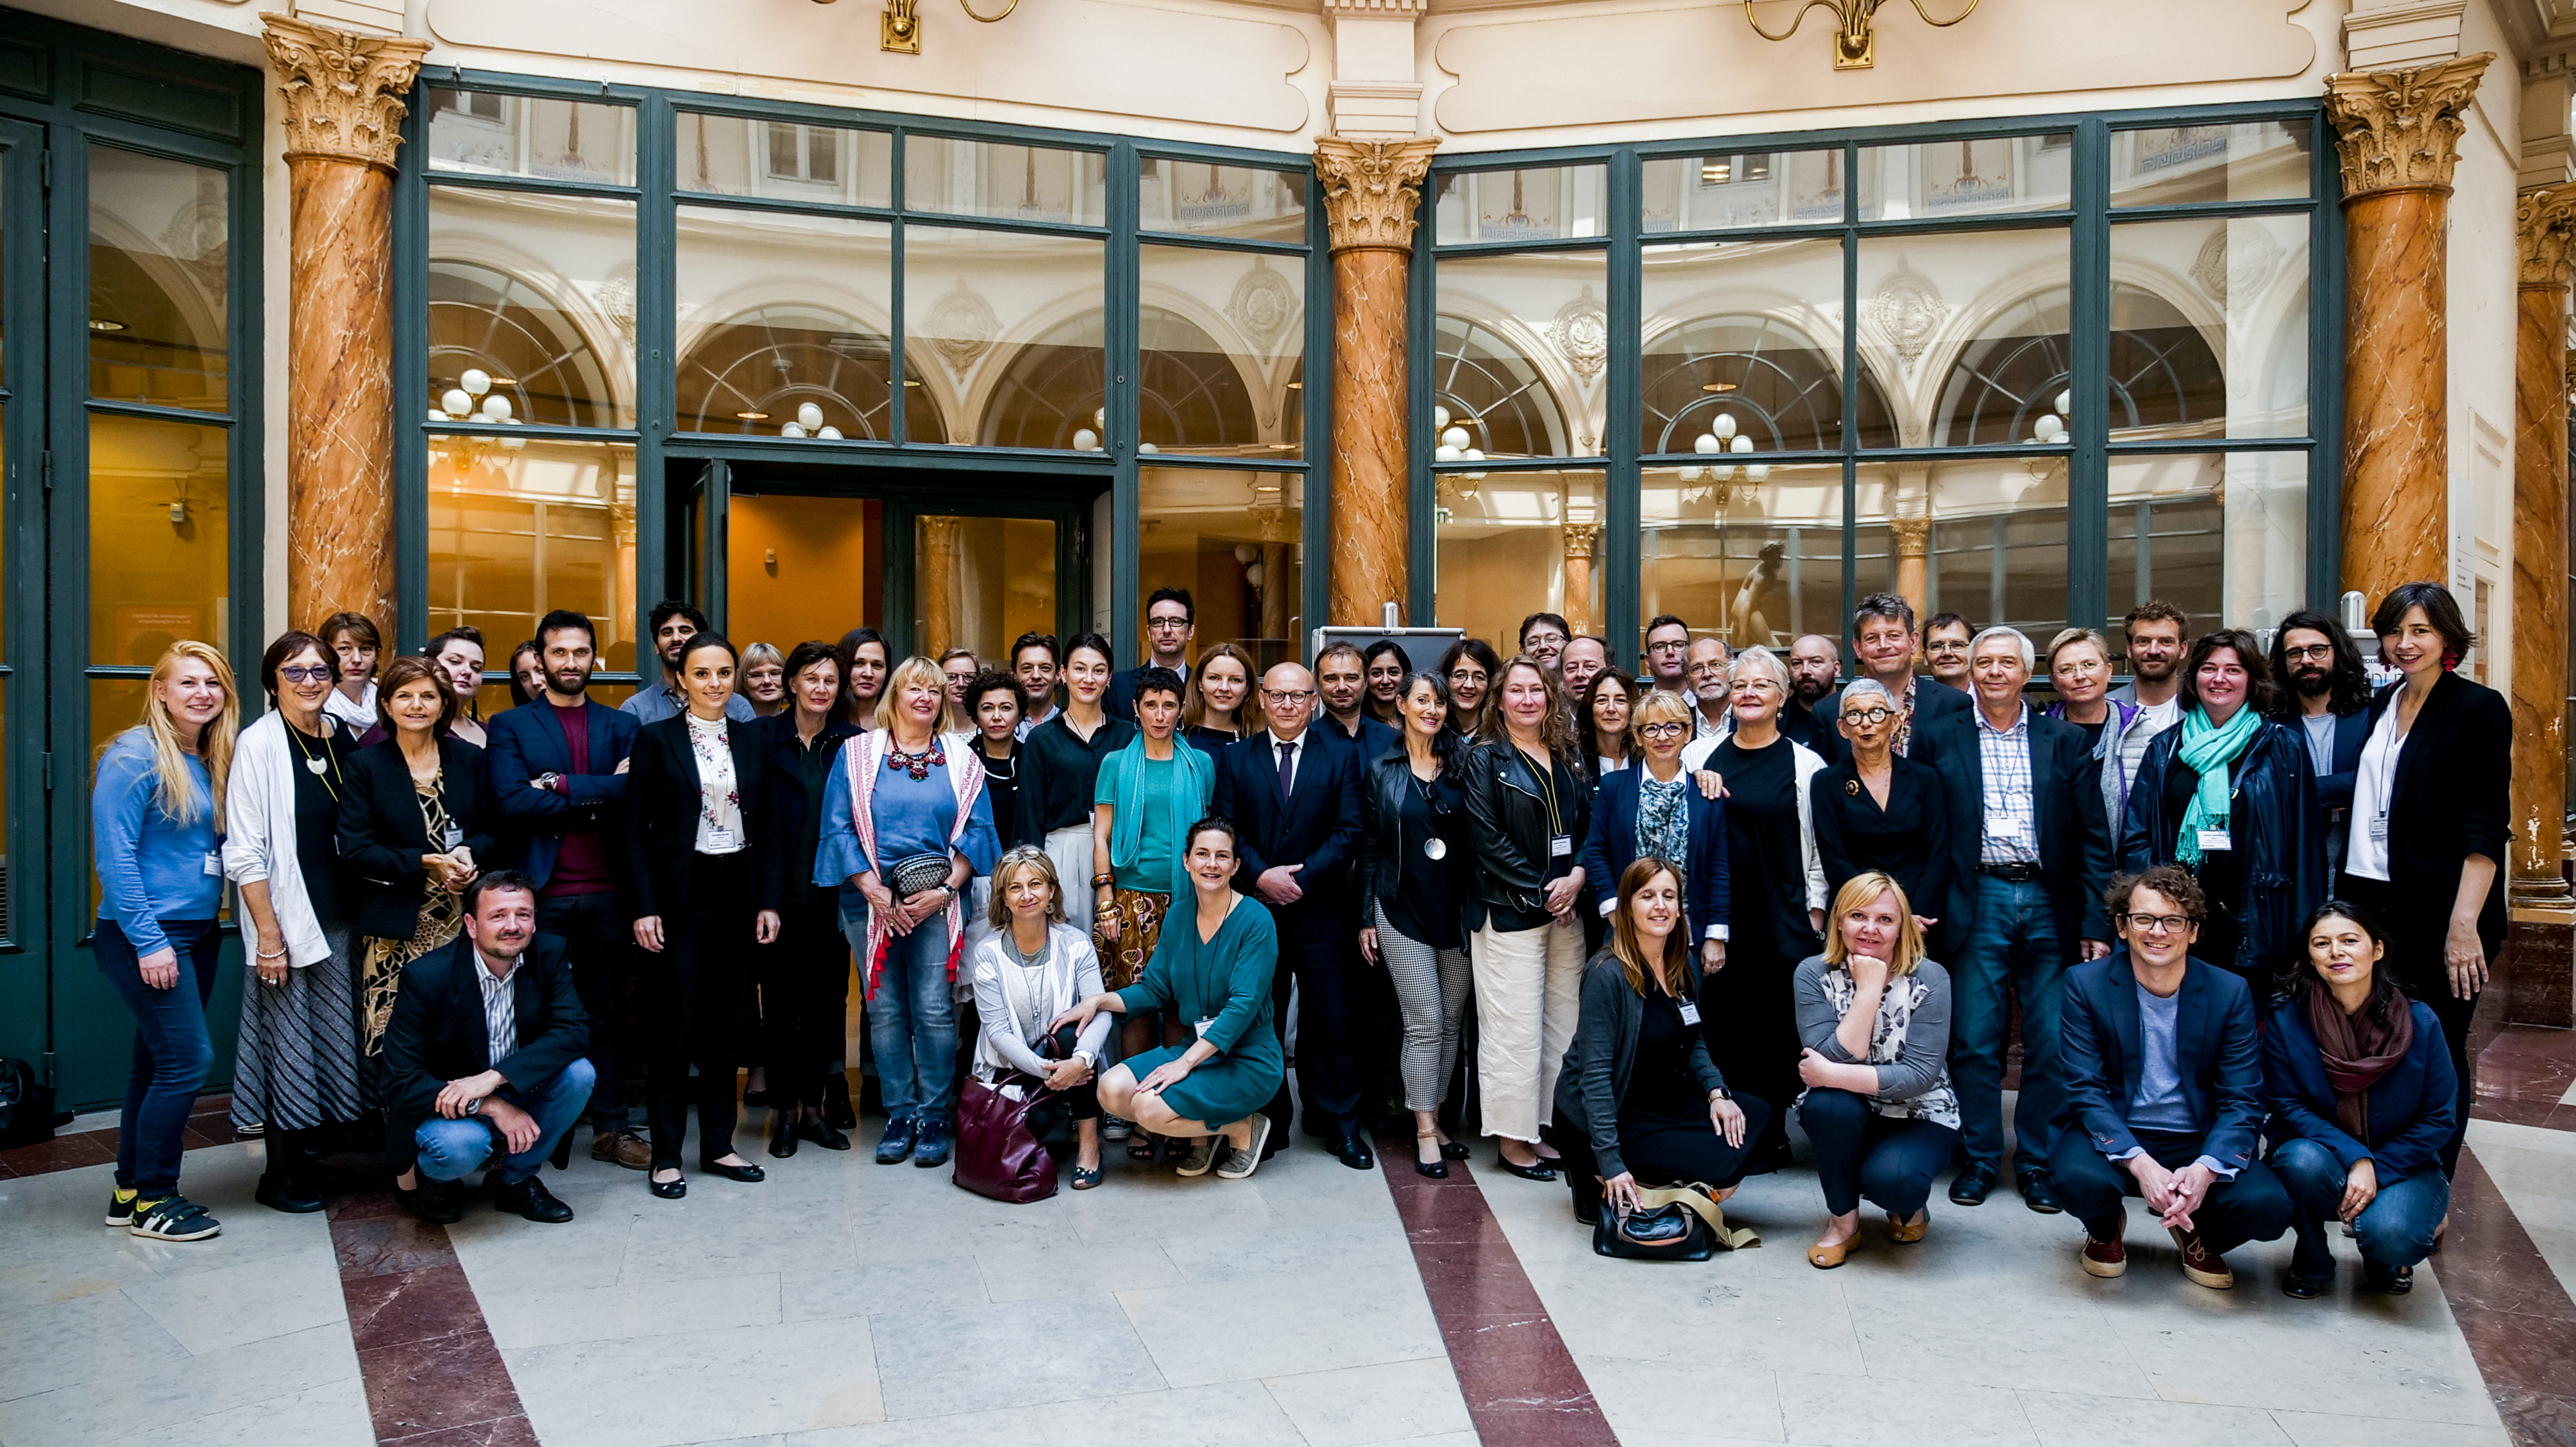 Assembly group picture at the Institut national d'histoire de l'art in Paris, France
Image courtesy: Compendium of Cultural Policies and Trends' Association
(c) Bogdan Palici